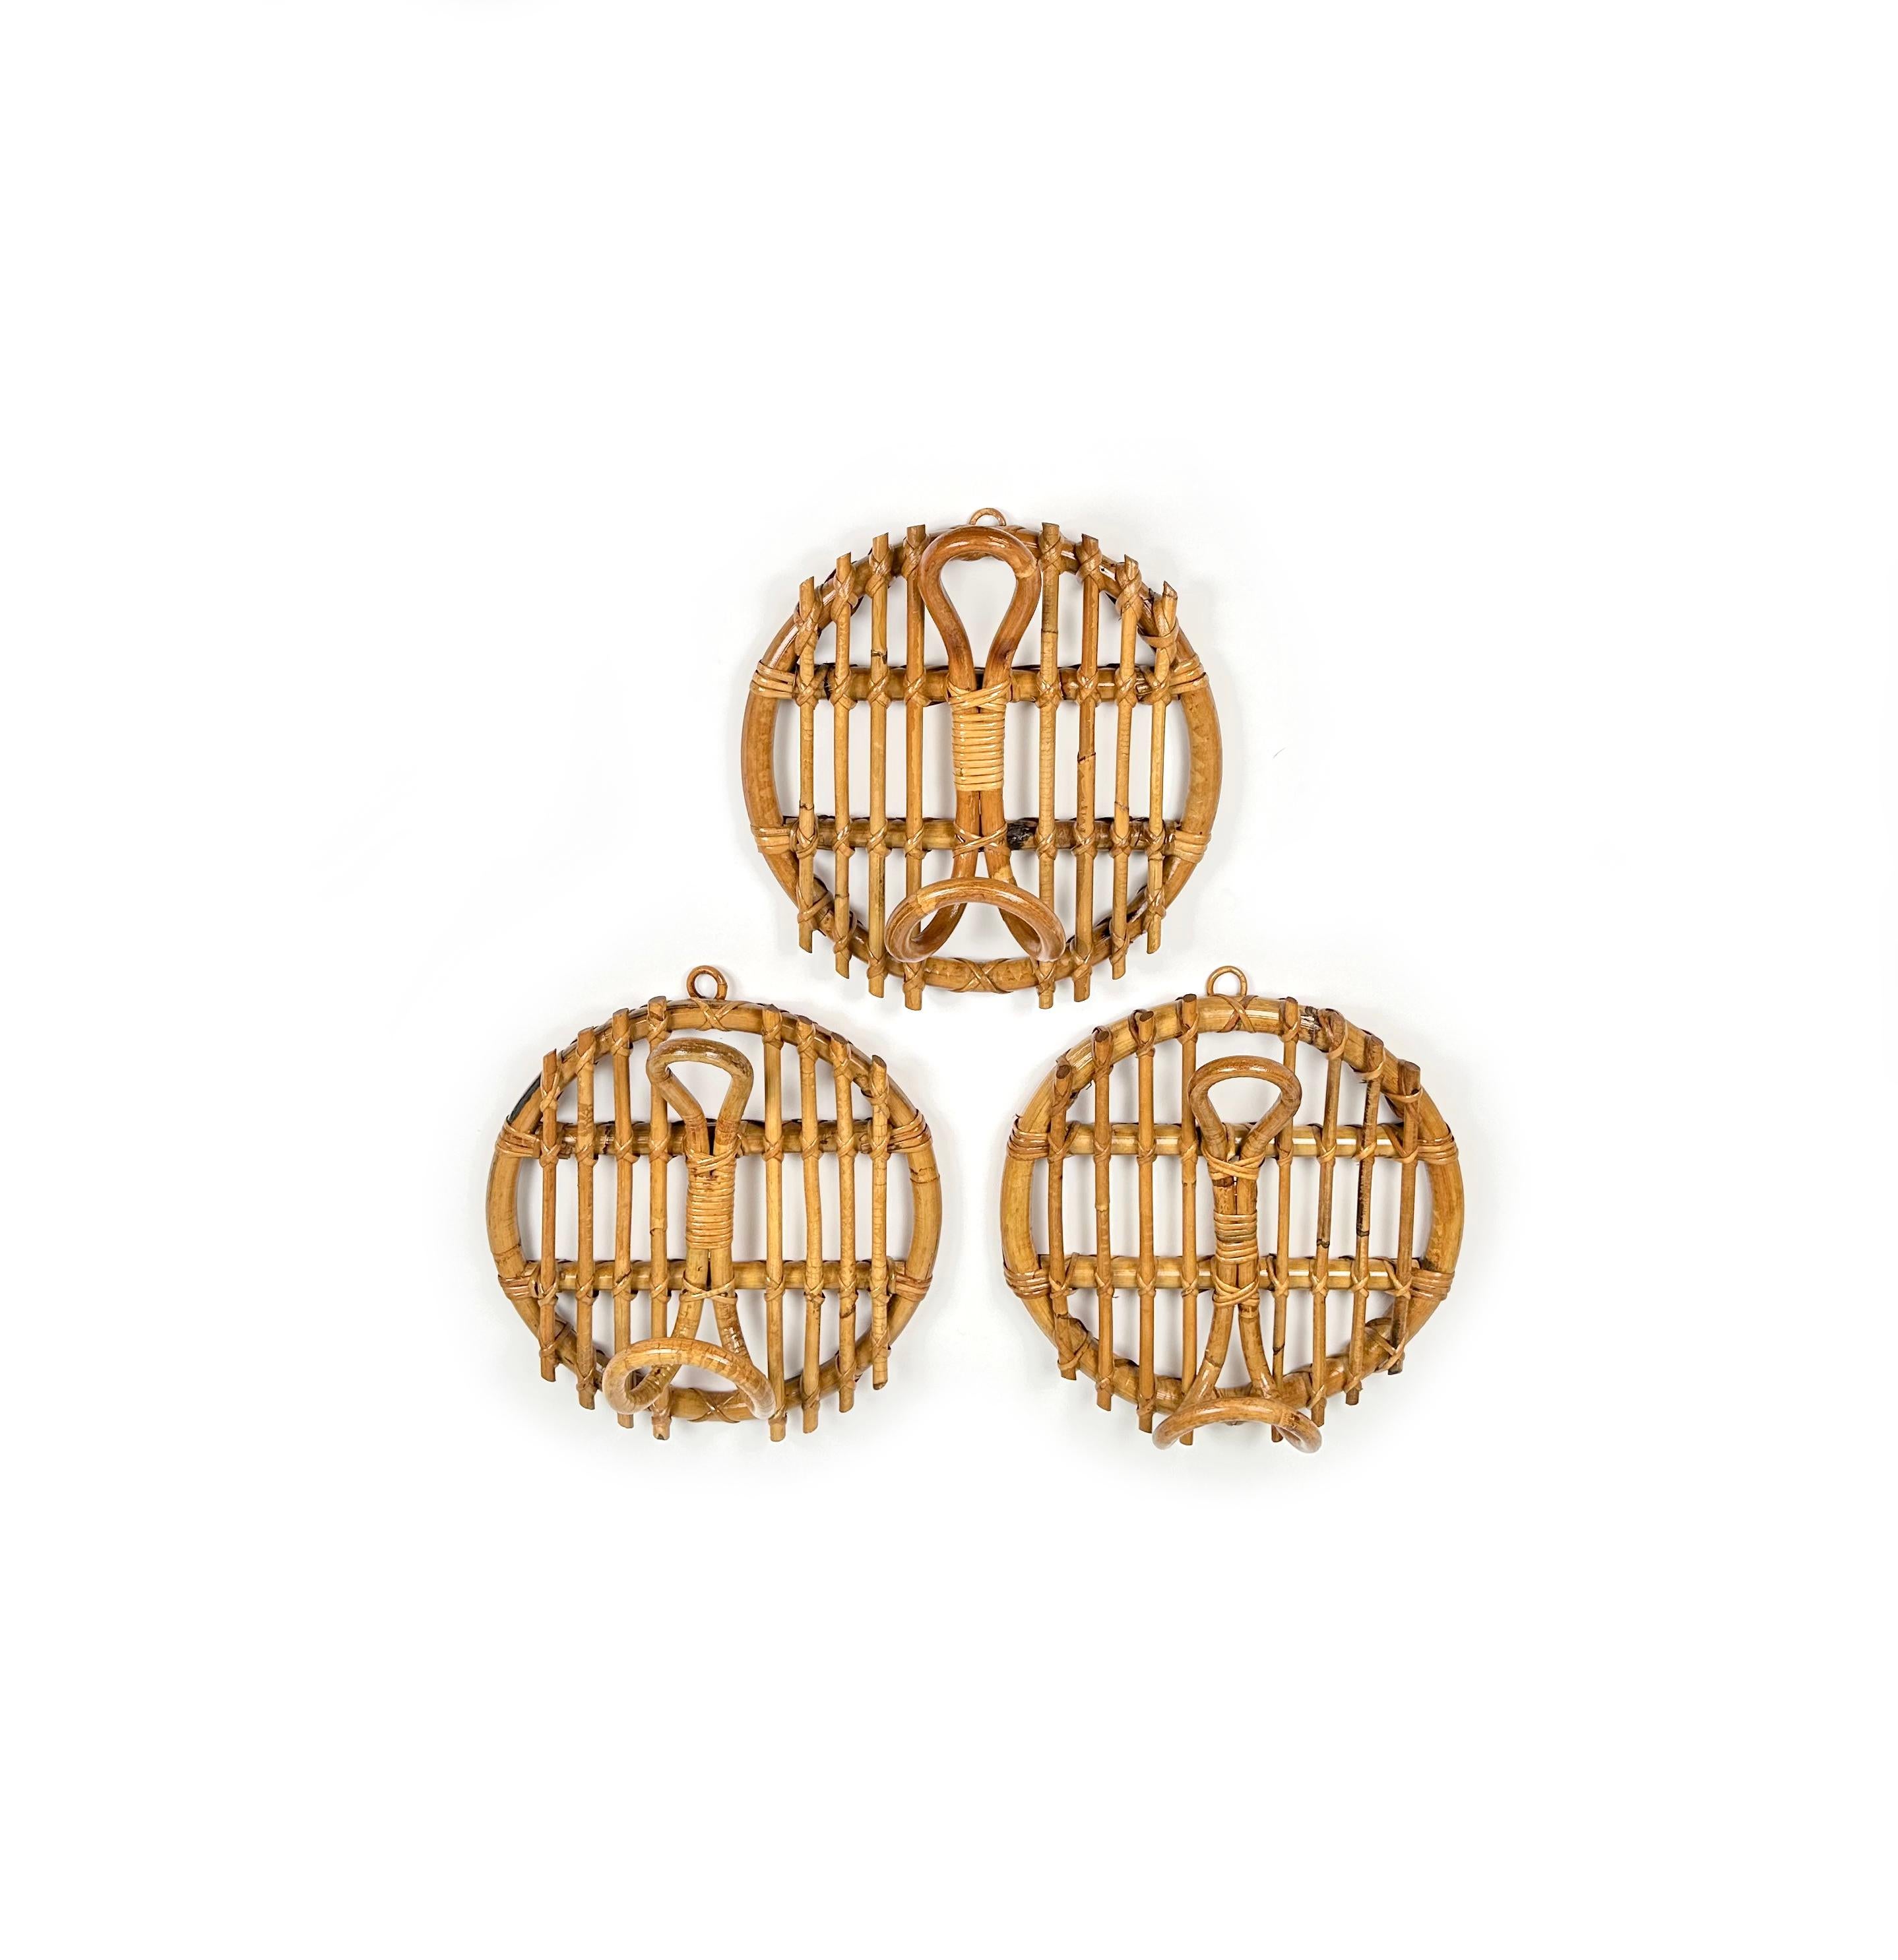 Mid-20th Century Set of 3 Coat Rack in Bamboo and Rattan Franco Albini Style, Italy, 1960s